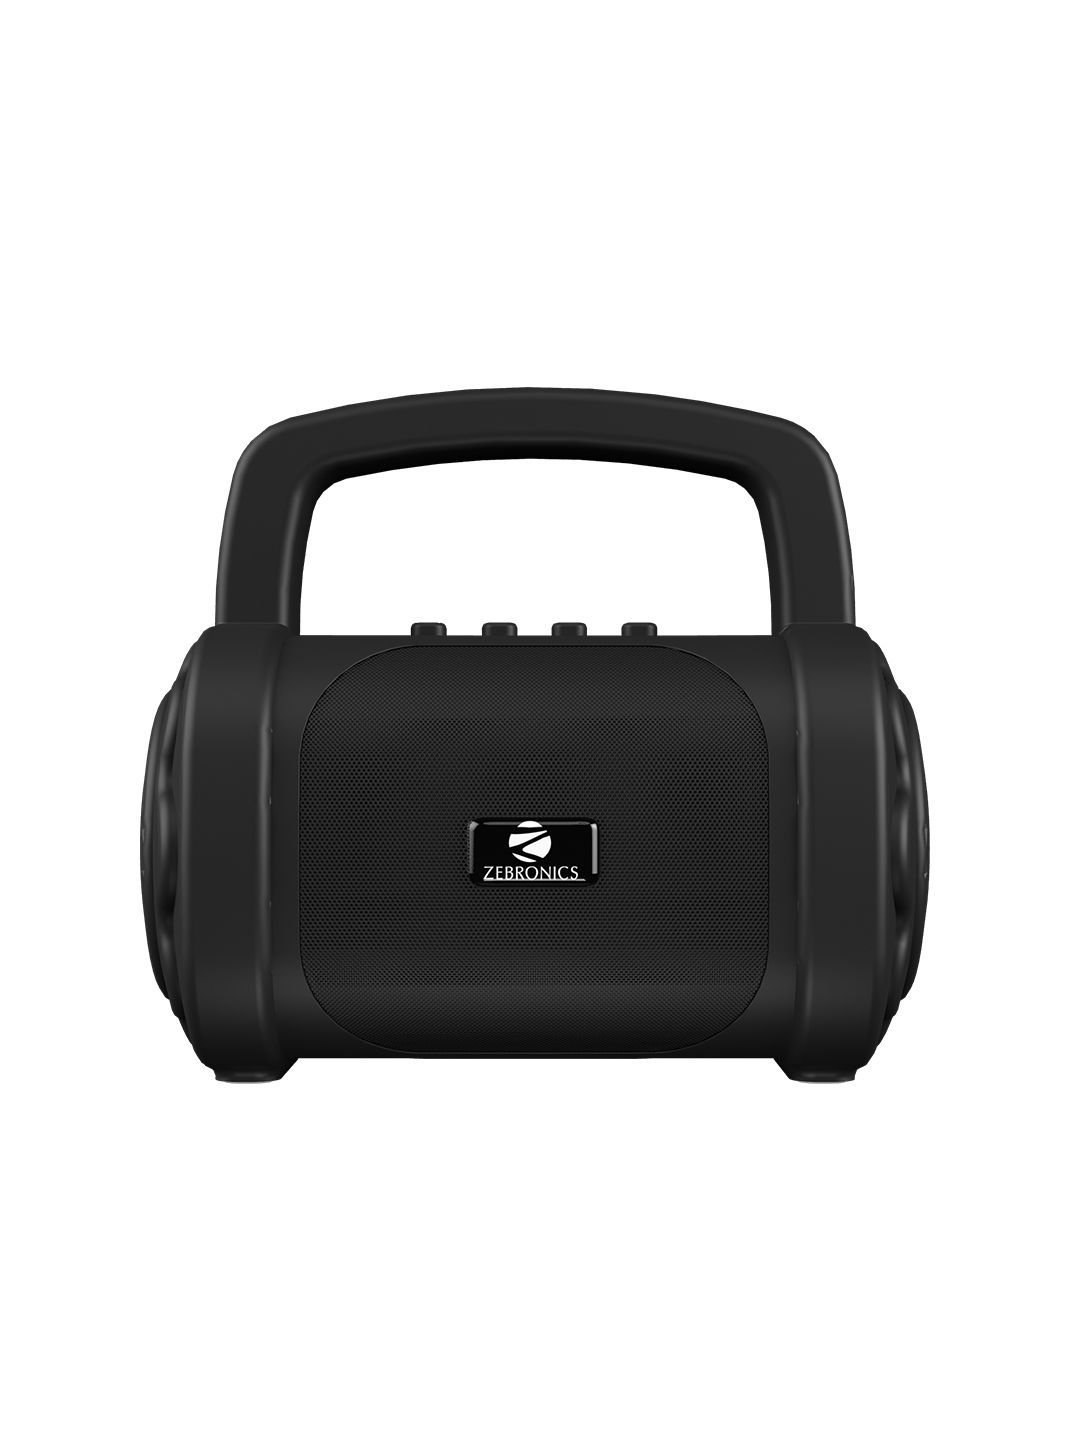 ZEBRONICS Zeb-County 3 Portable Wireless Speaker Supporting Bluetooth v5.0 - Black Price in India